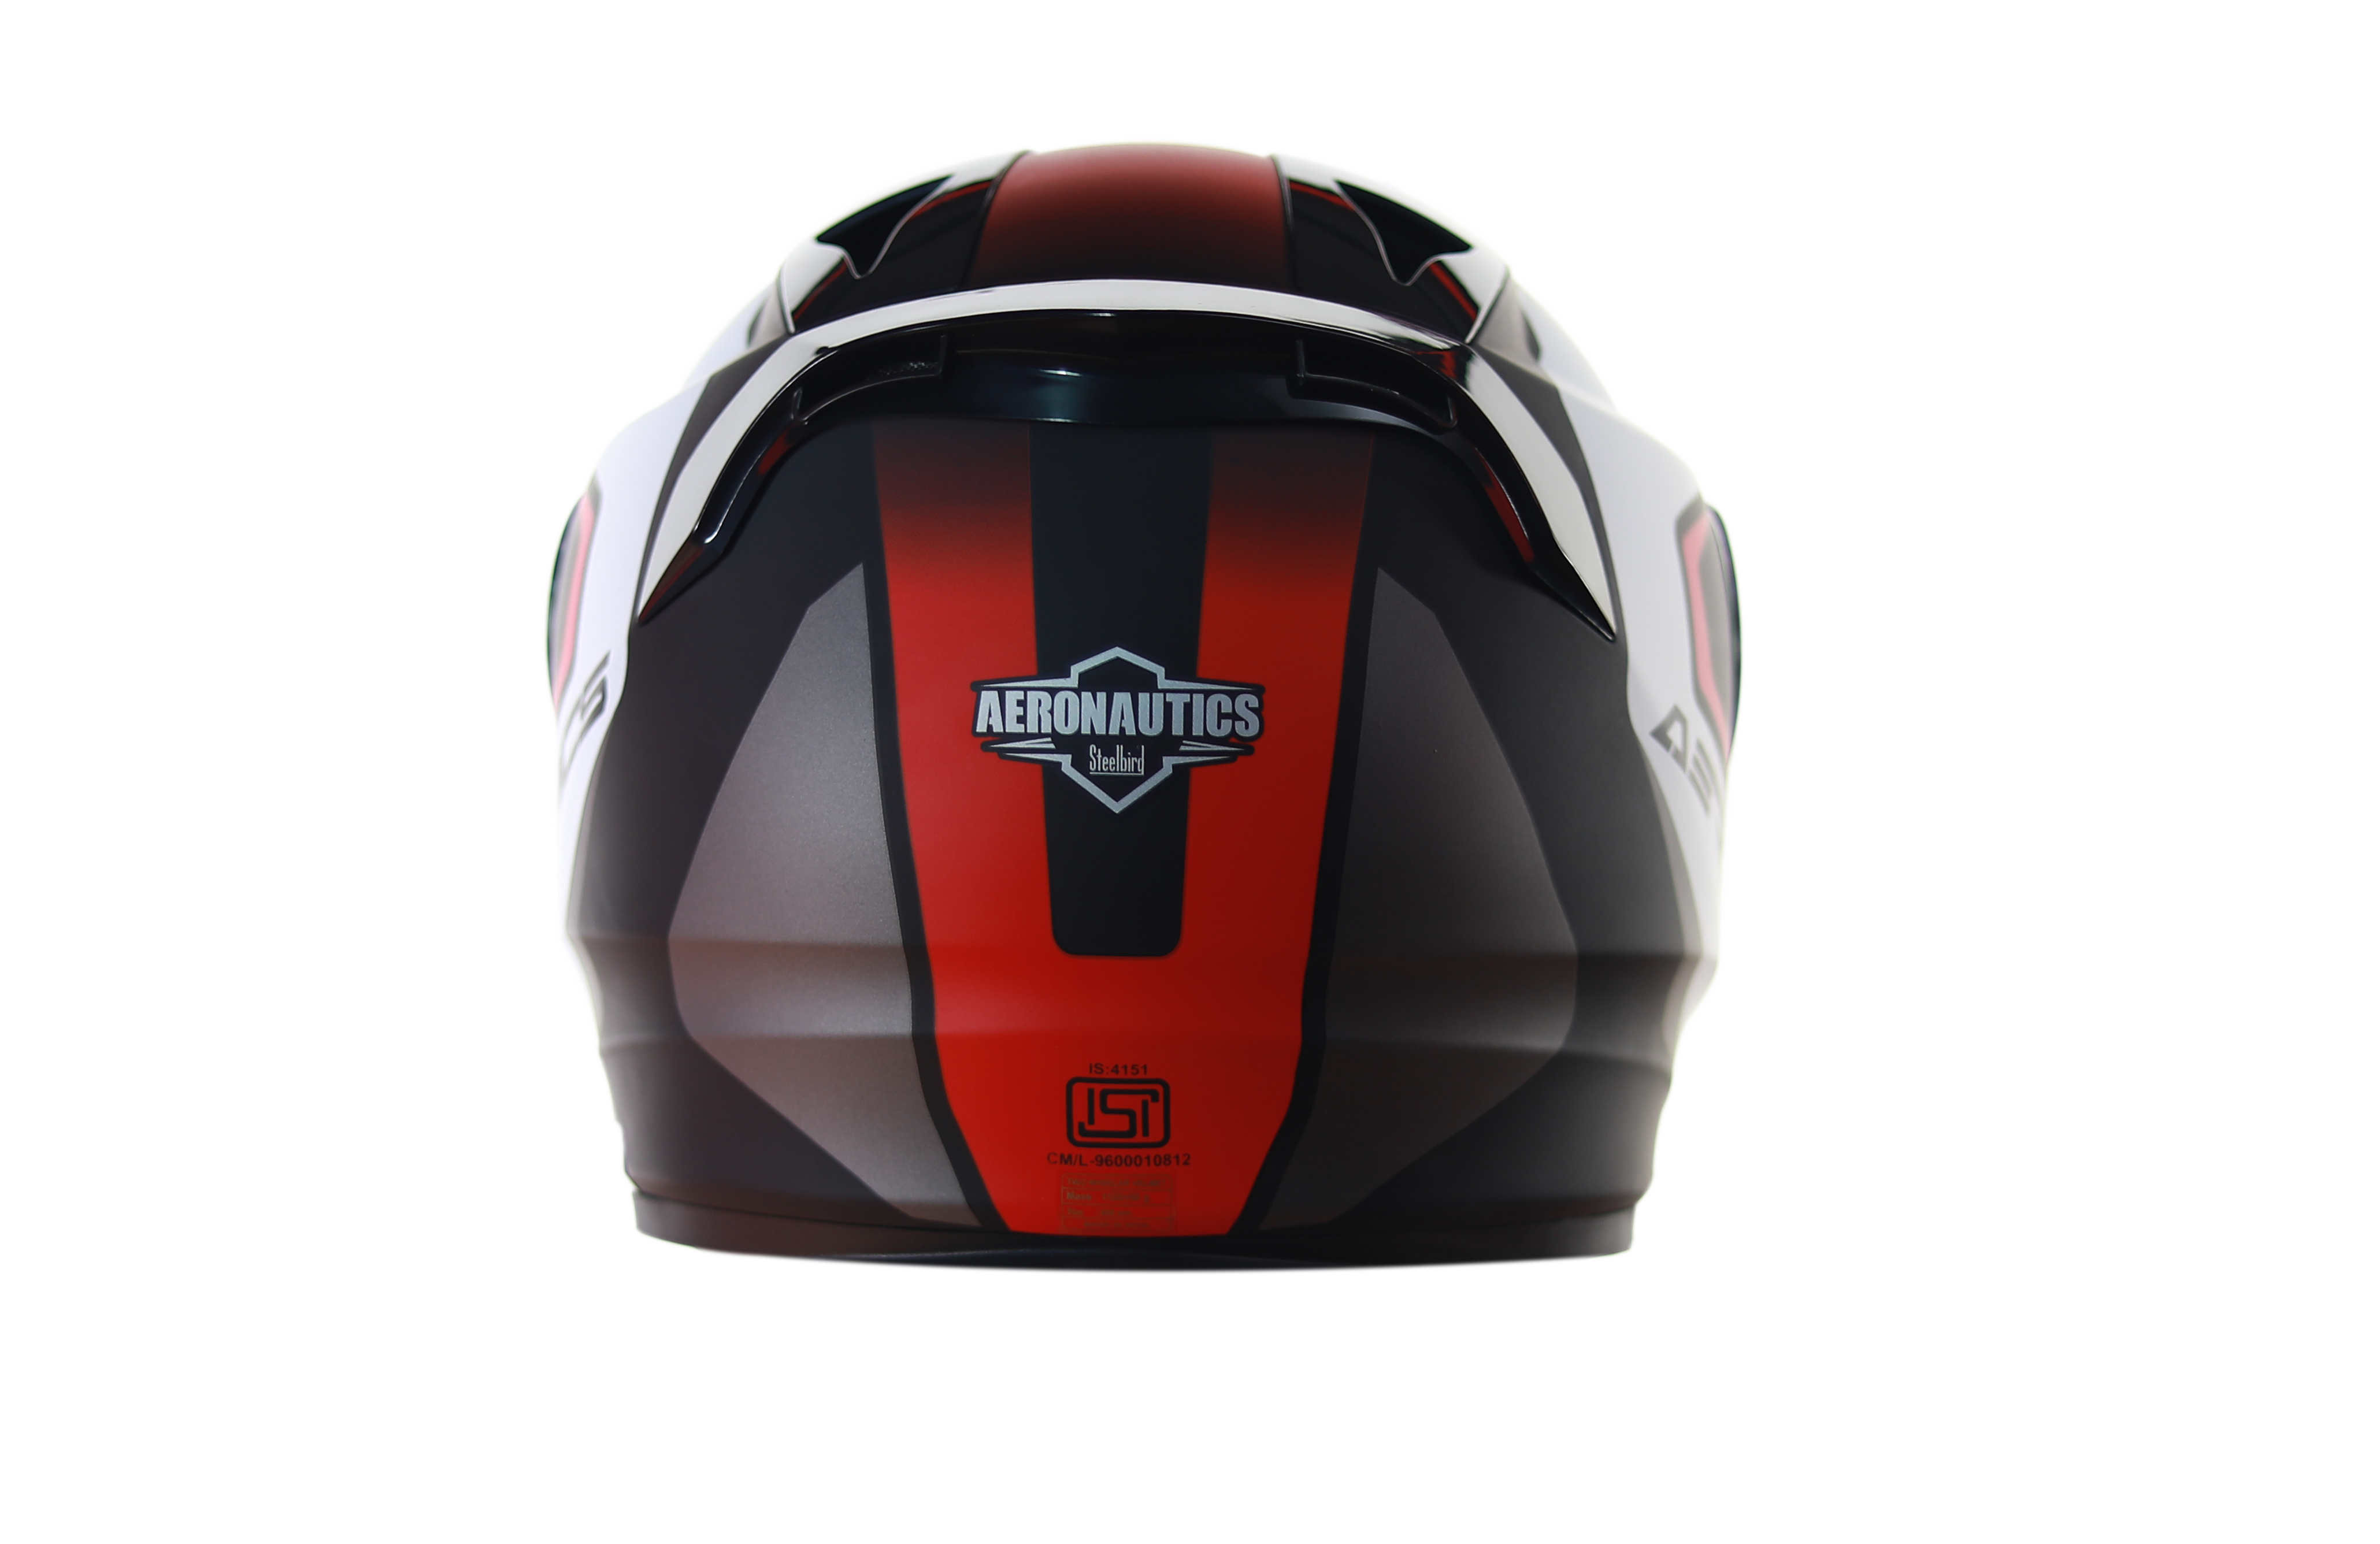 SA-1 Aerodynamics Mat Black/Red With Anti-Fog Shield Blue Night Vision Visor (Fitted With Clear Visor Extra Blue Night Vision Anti-Fog Shield Visor Free)